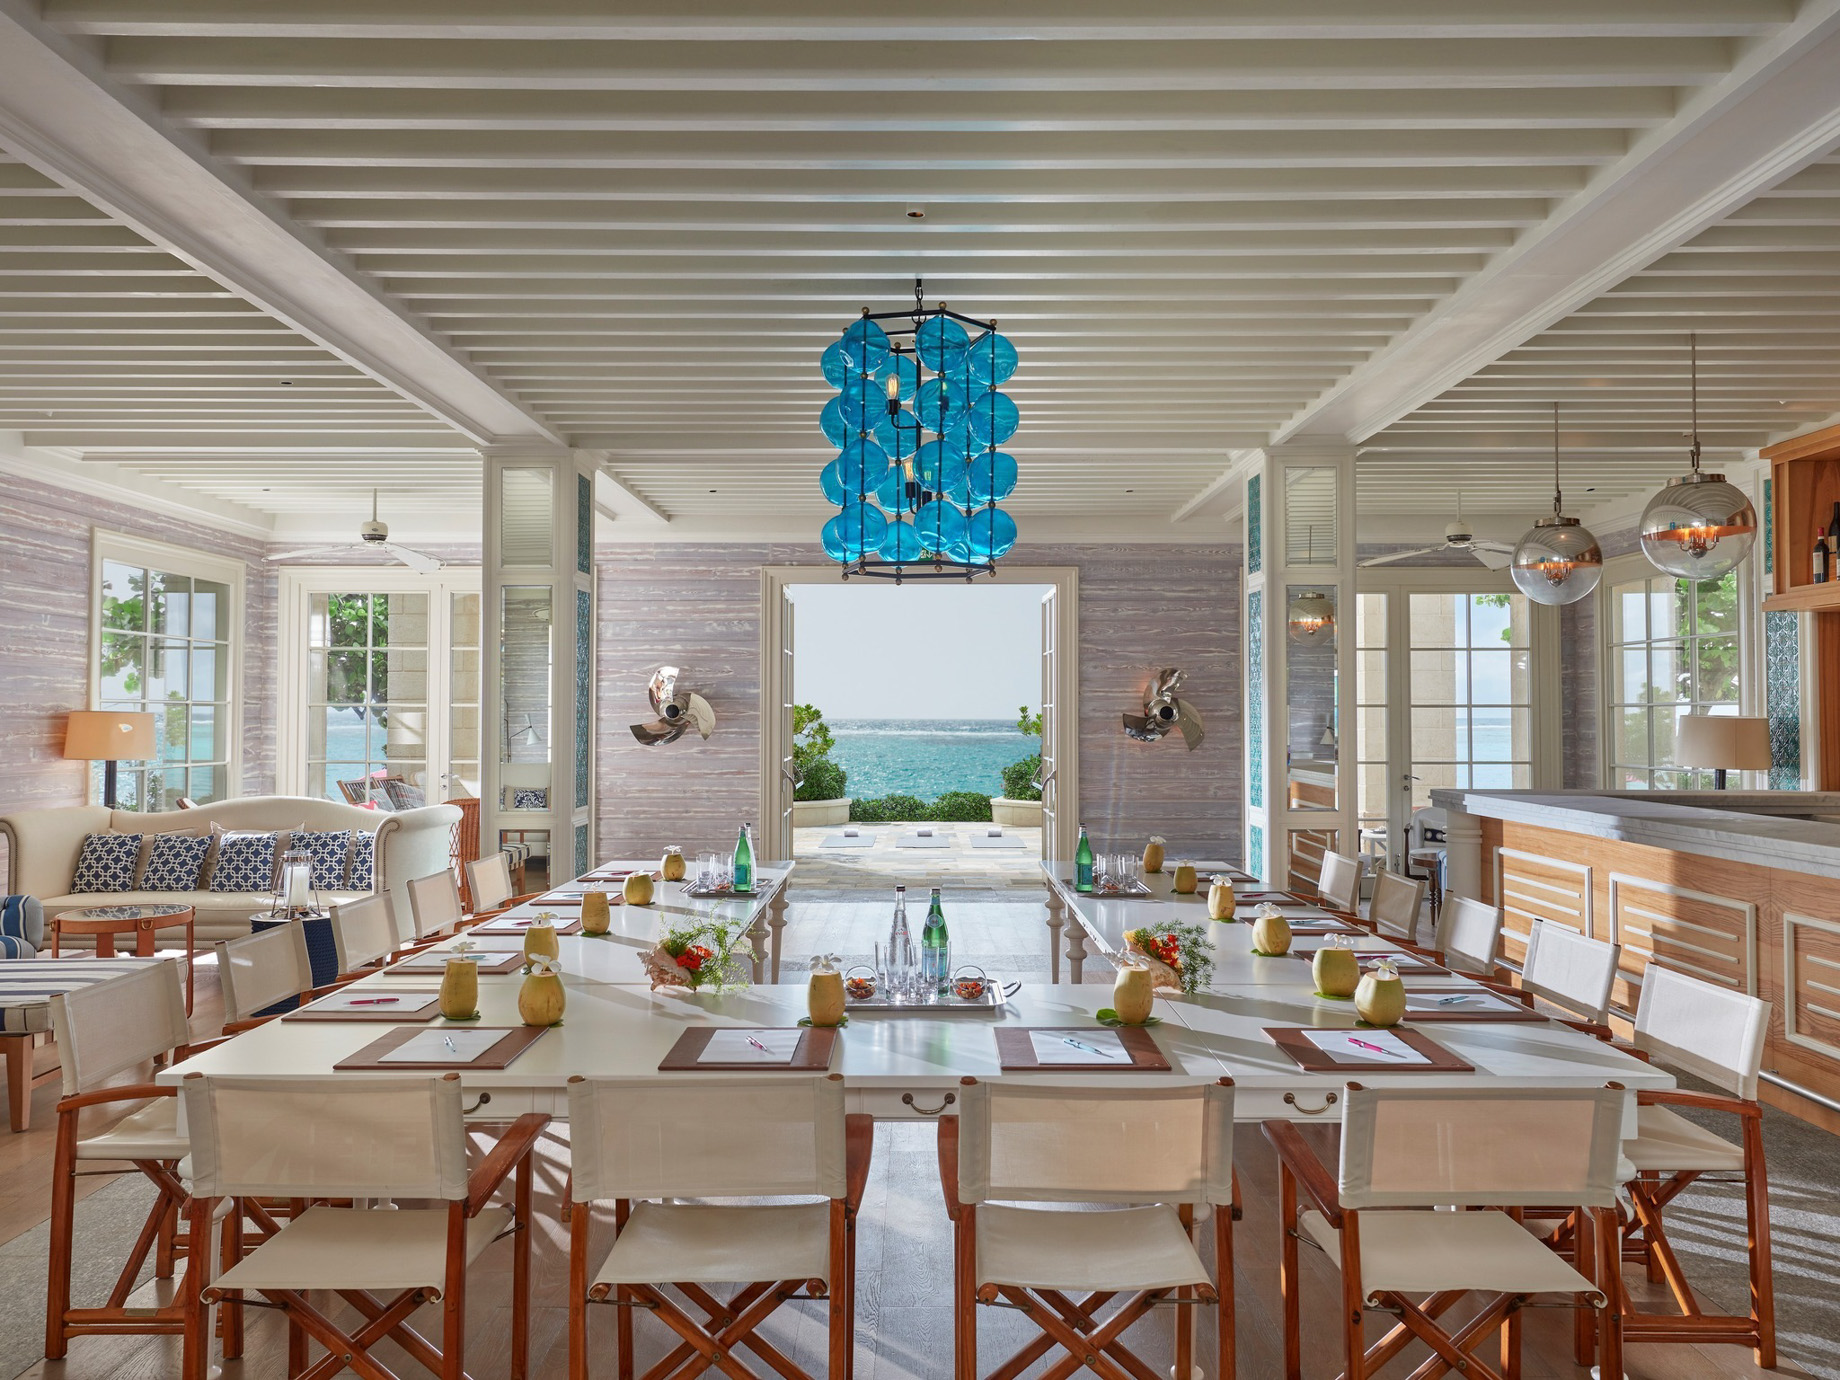 Mandarin Oriental, Canouan Island Resort – Saint Vincent and the Grenadines – Meeting or Event Venue Space